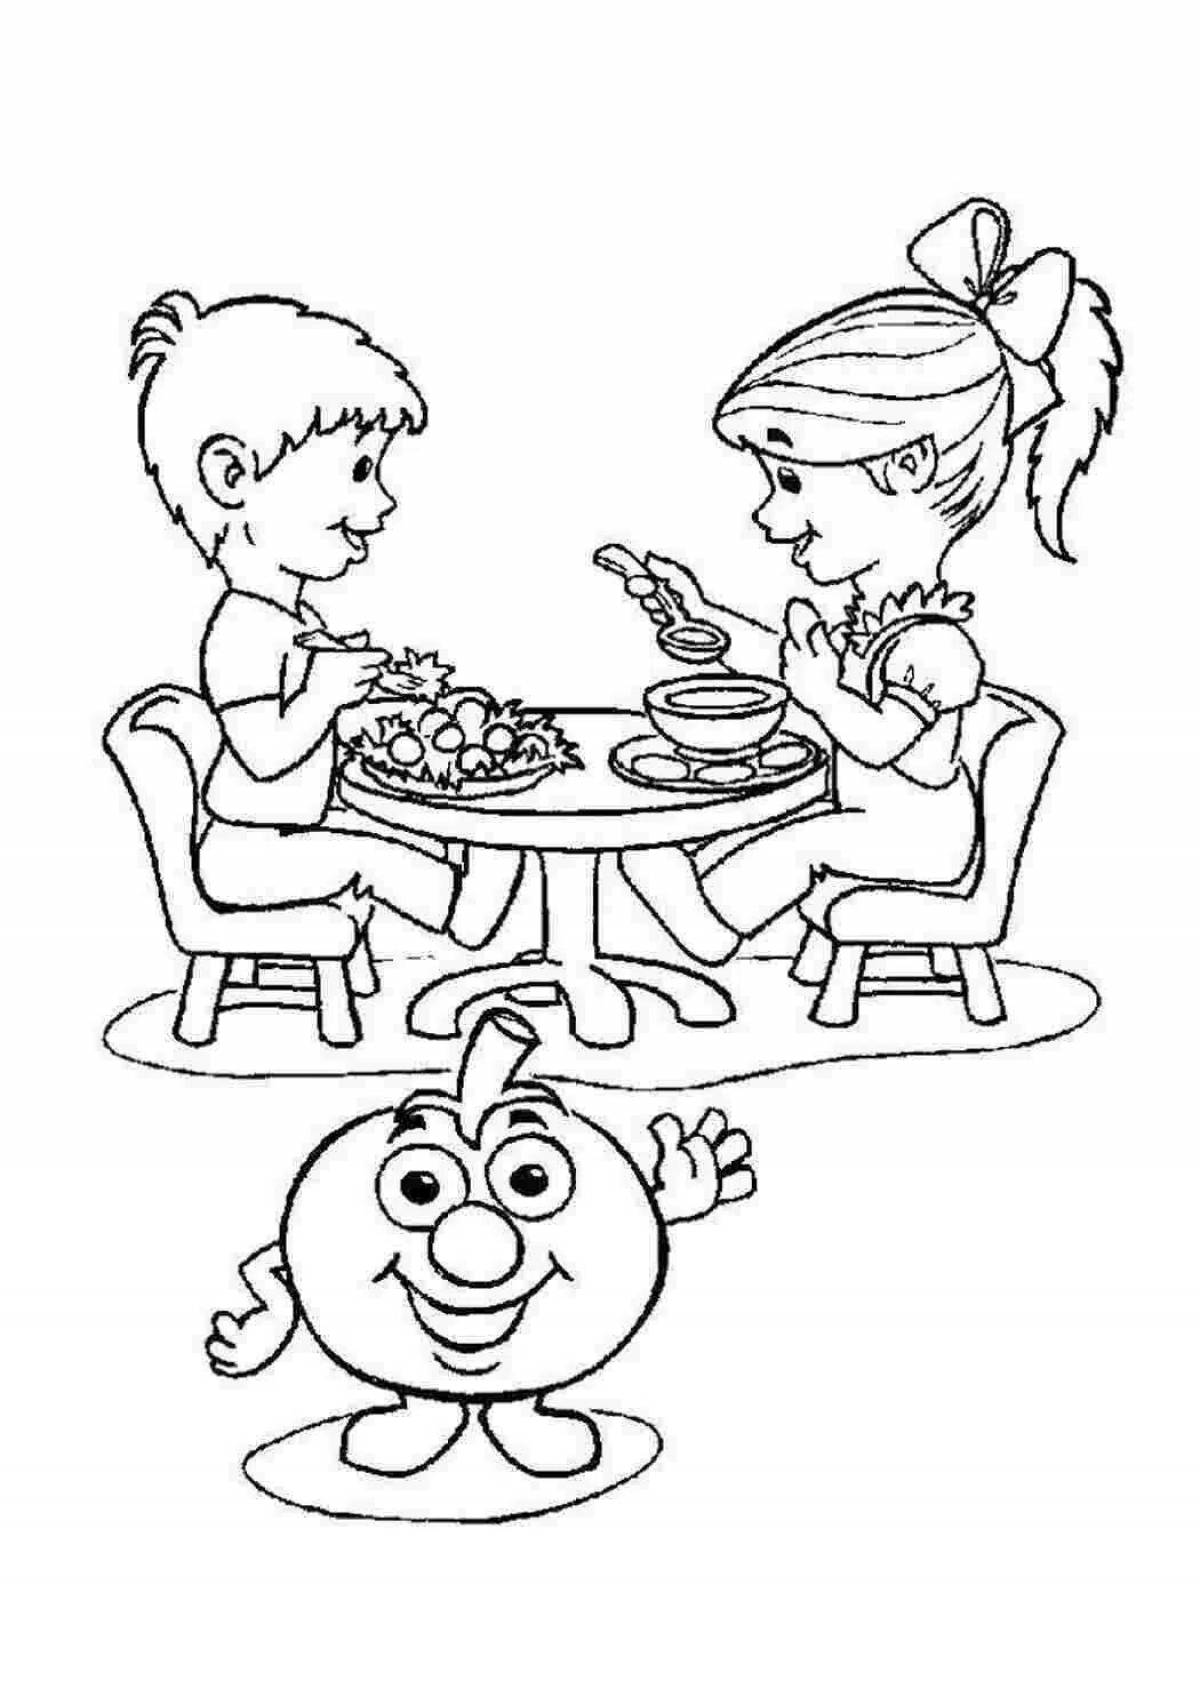 Adorable etiquette coloring book for 4-5 year olds